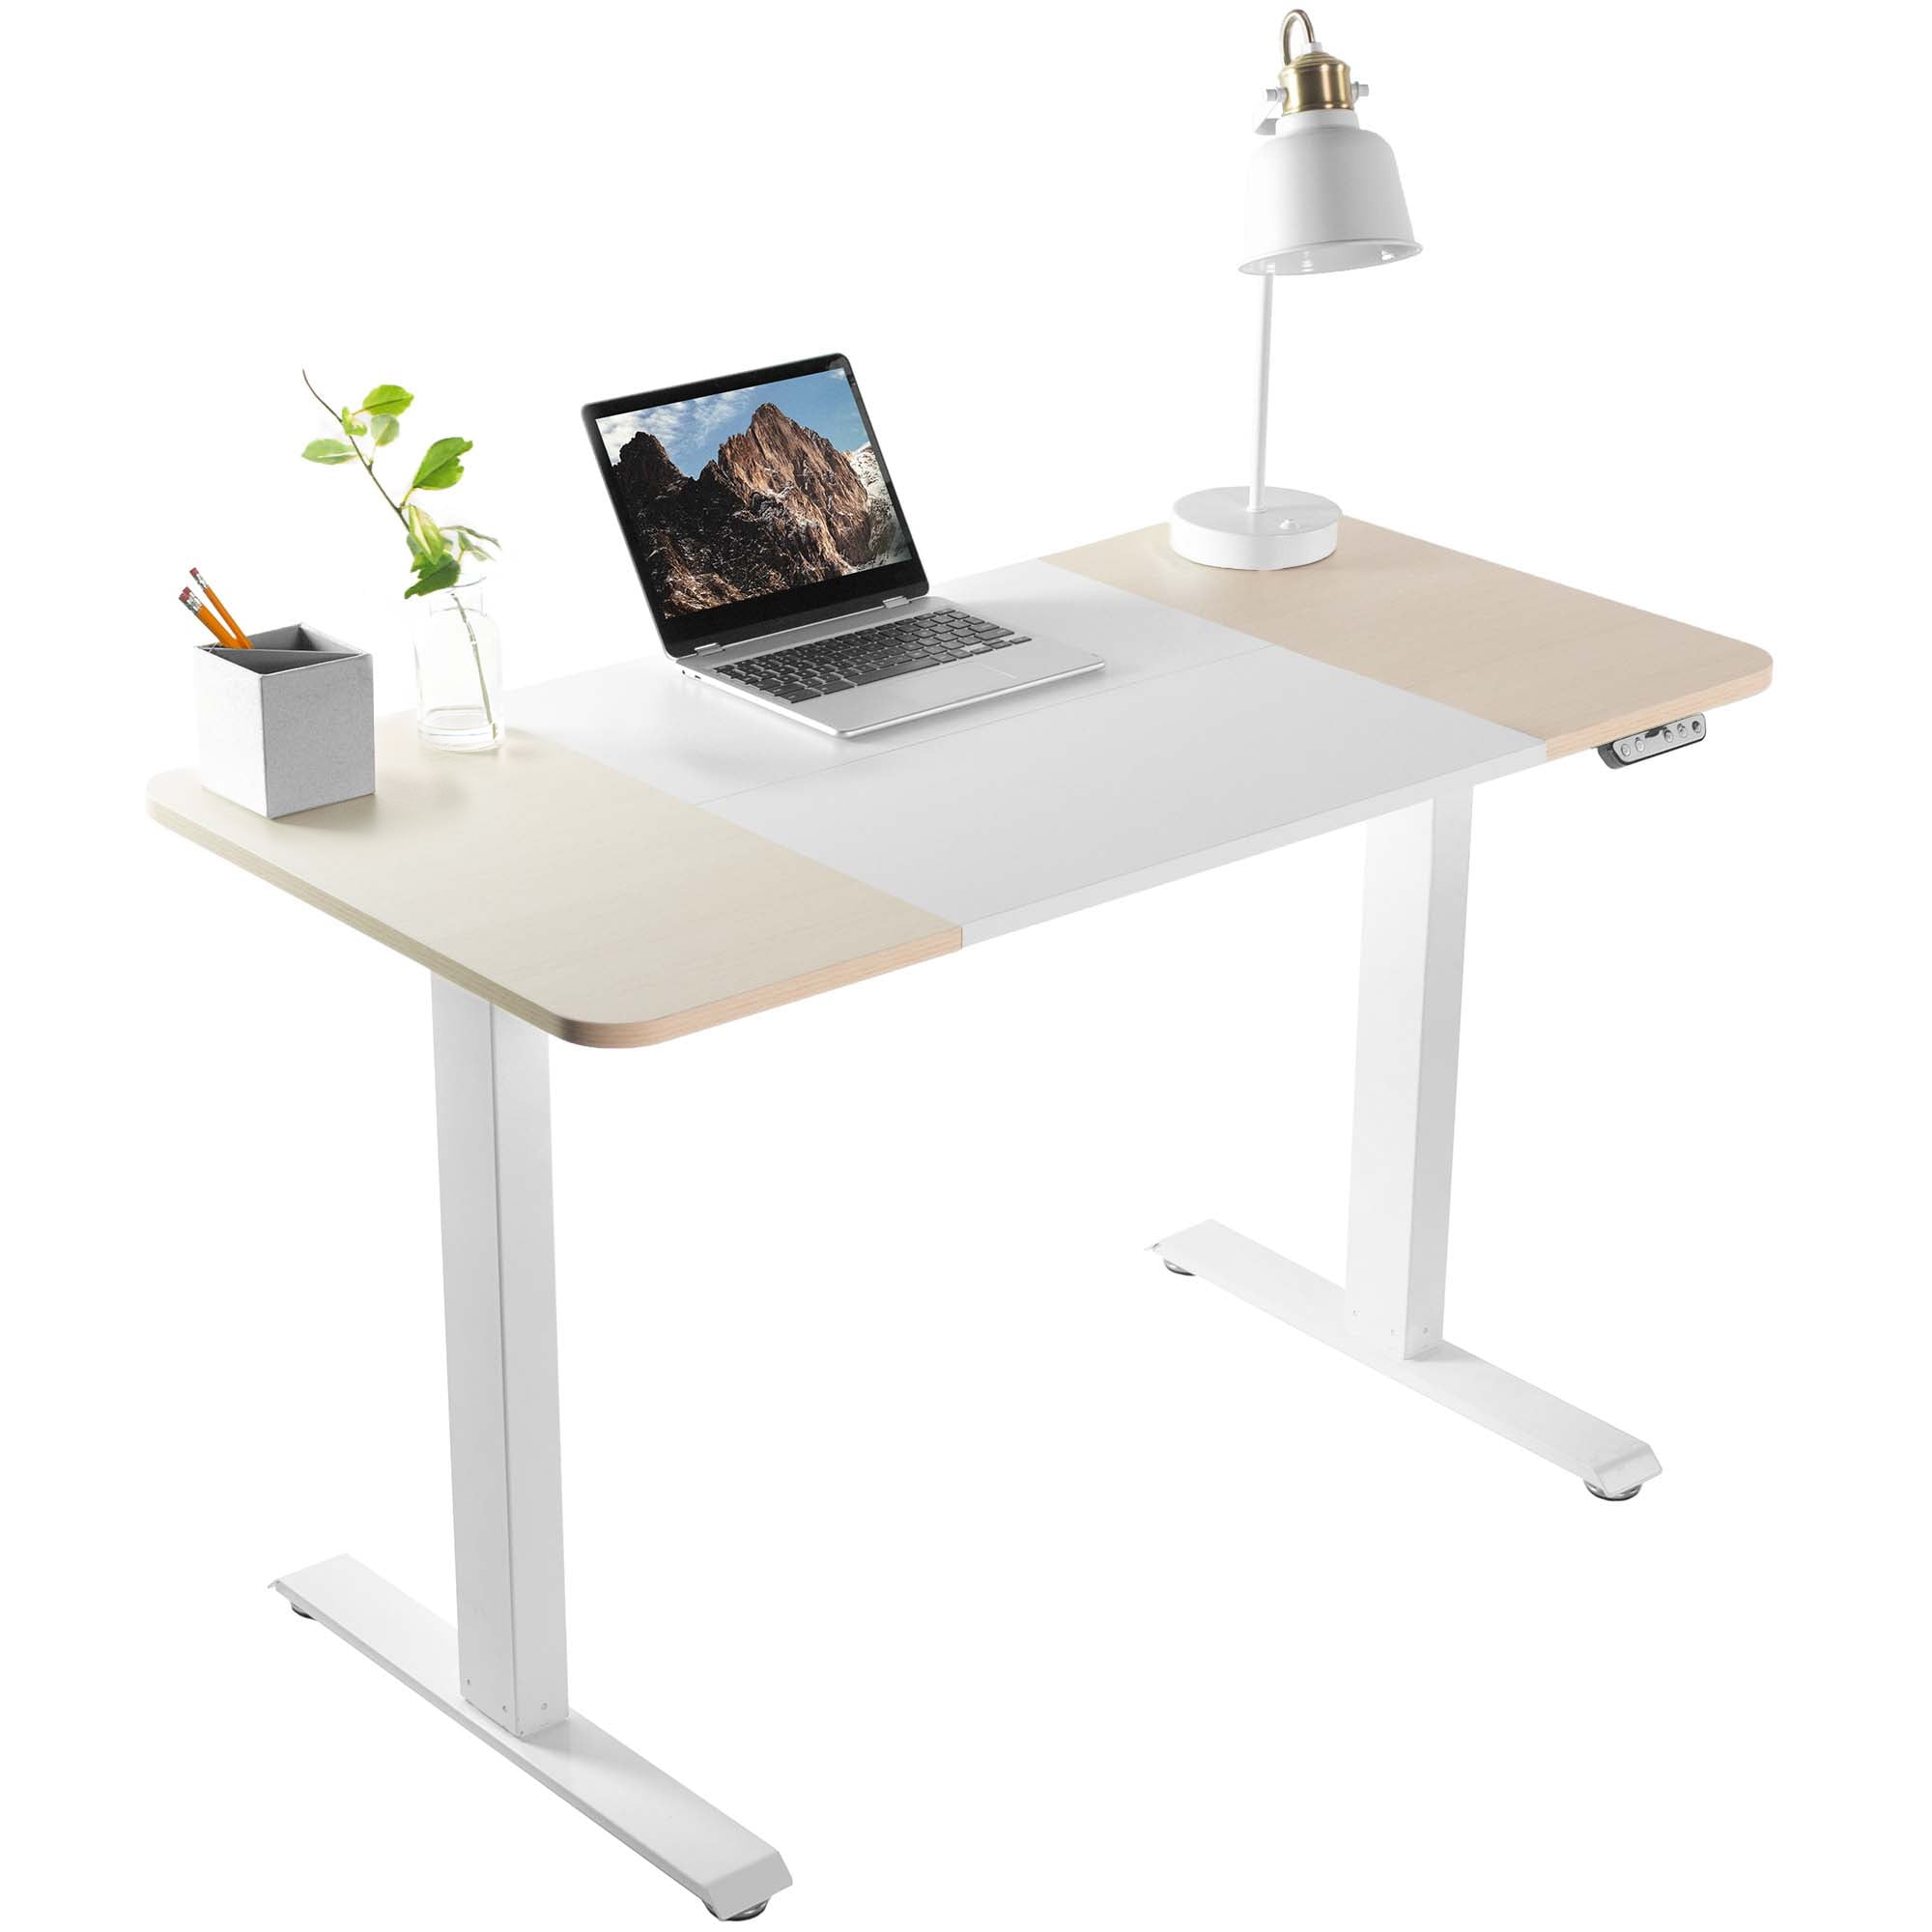 Details about   USED VIVO White 44"x 24" Electric Sit Stand Desk Height Adjustable Workstation 